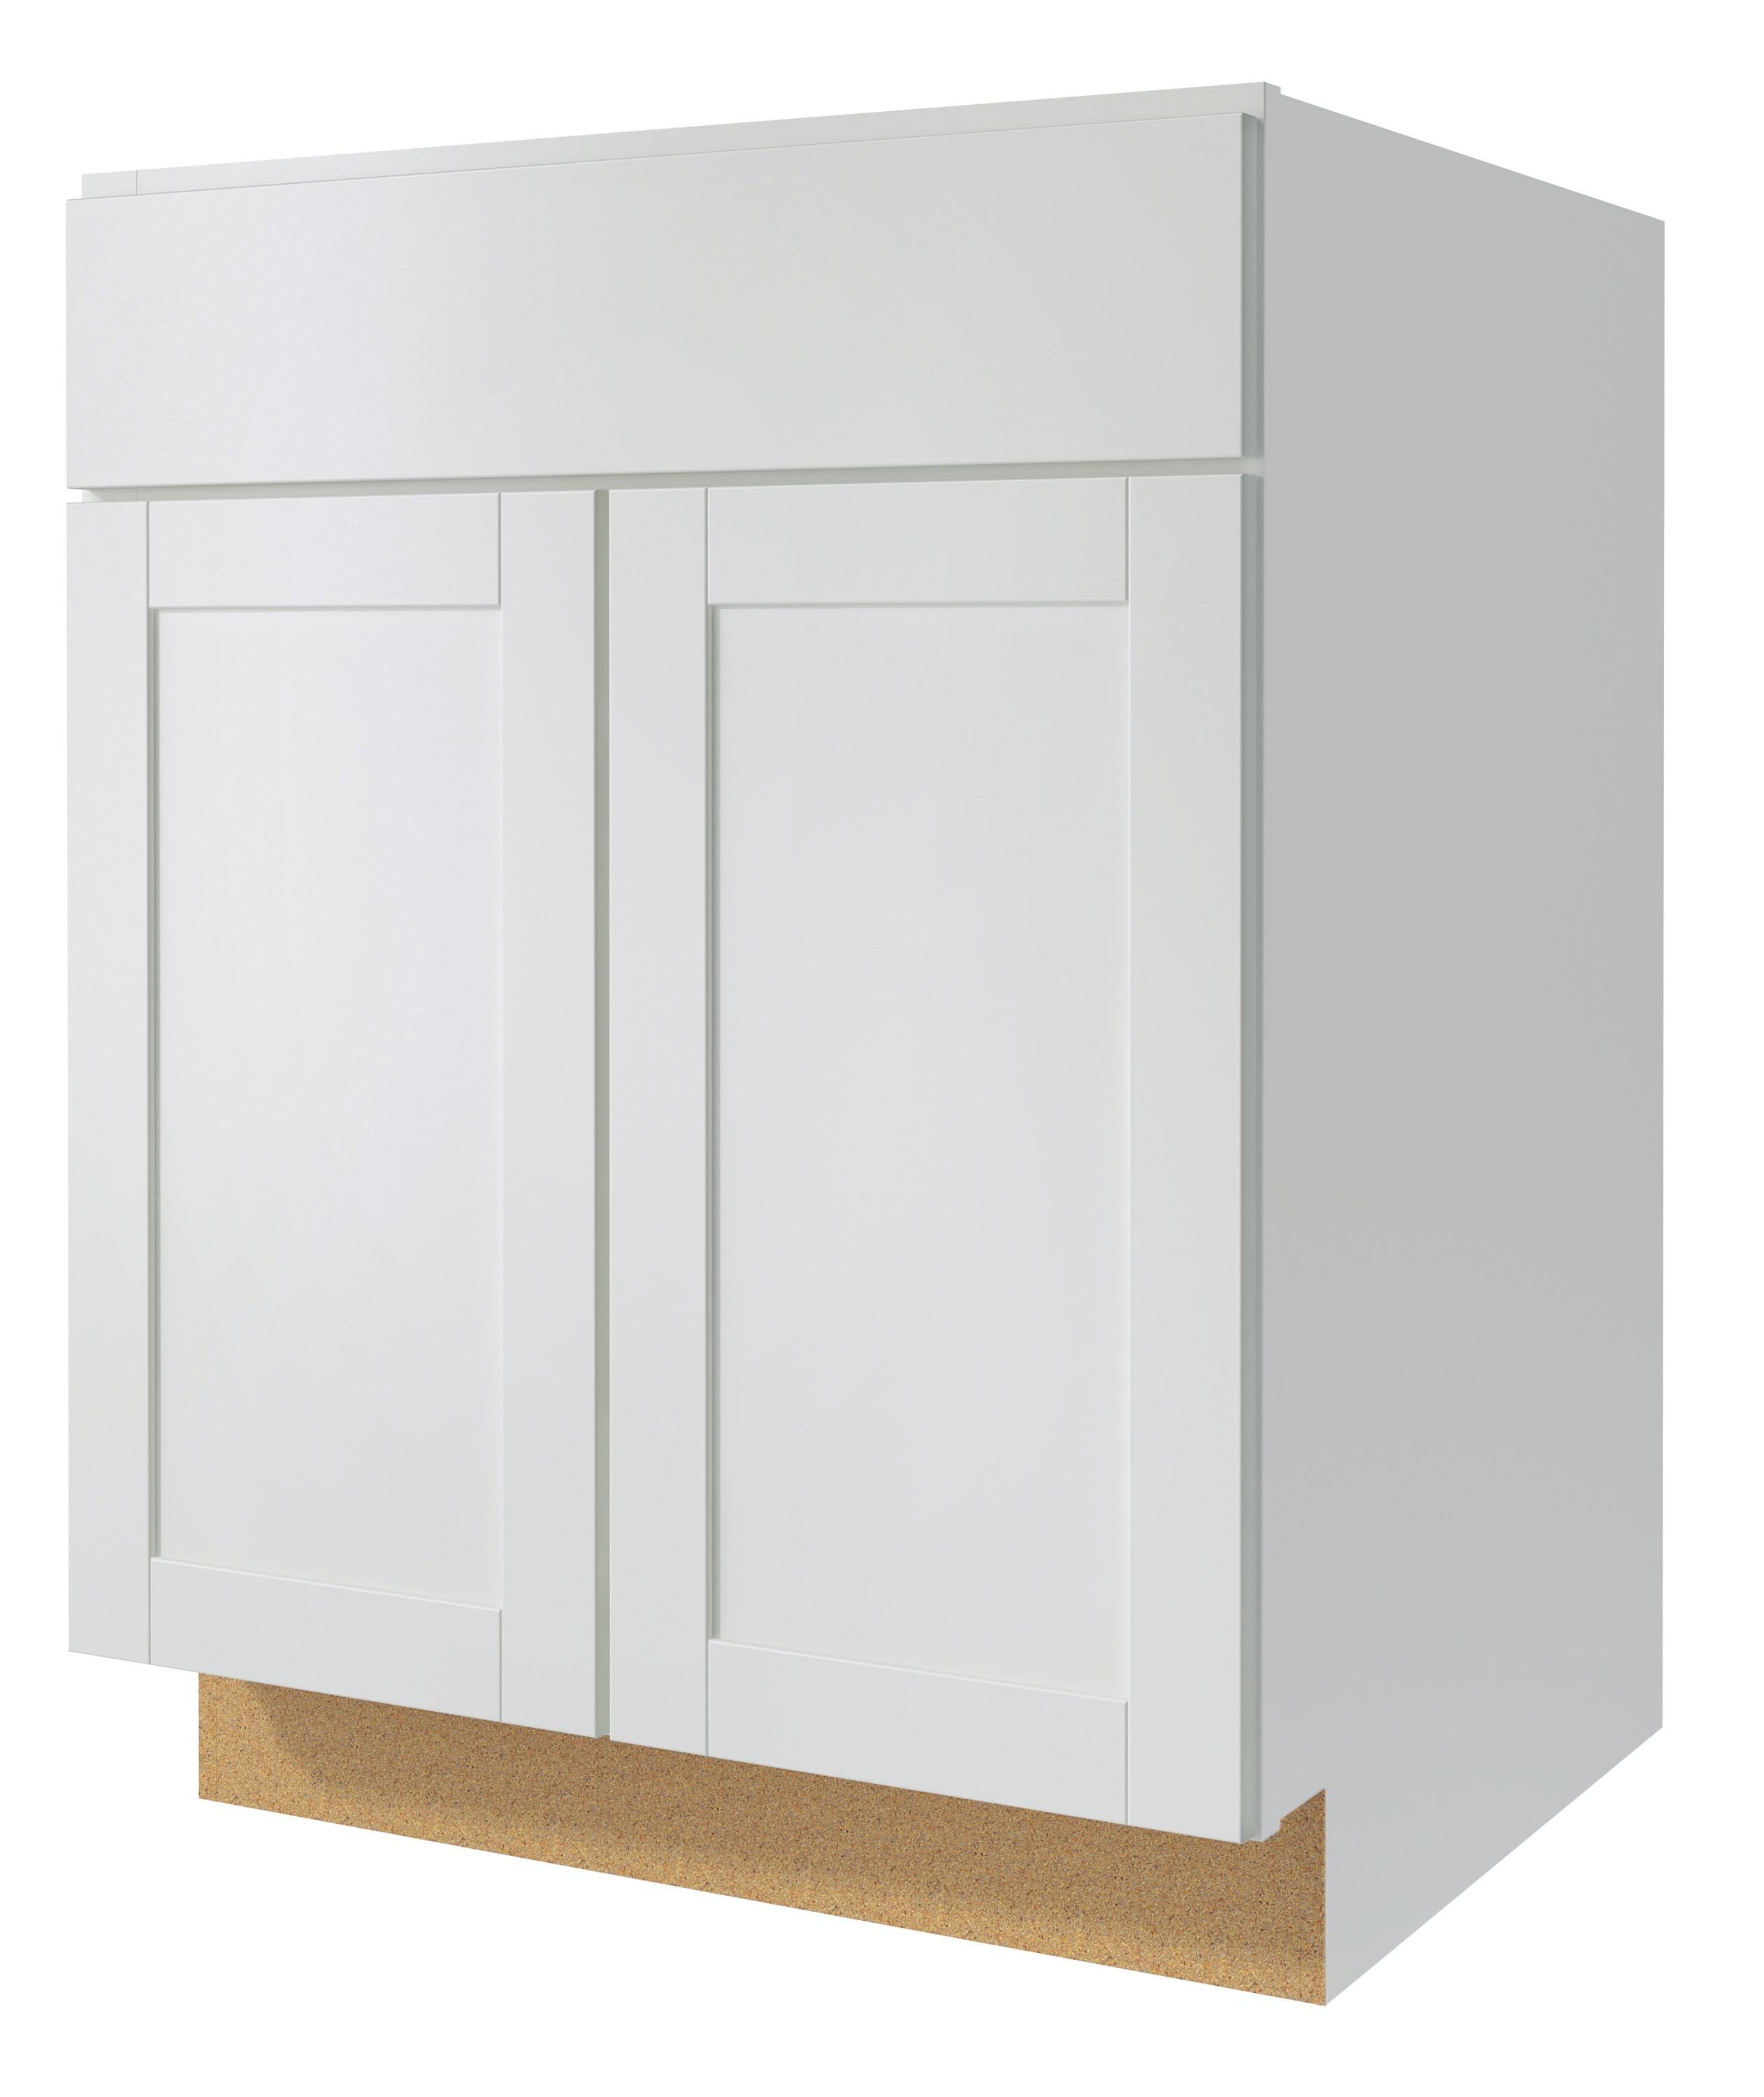 Stock Cabinet In The Kitchen Cabinets, 27 Base Kitchen Cabinet With Drawers